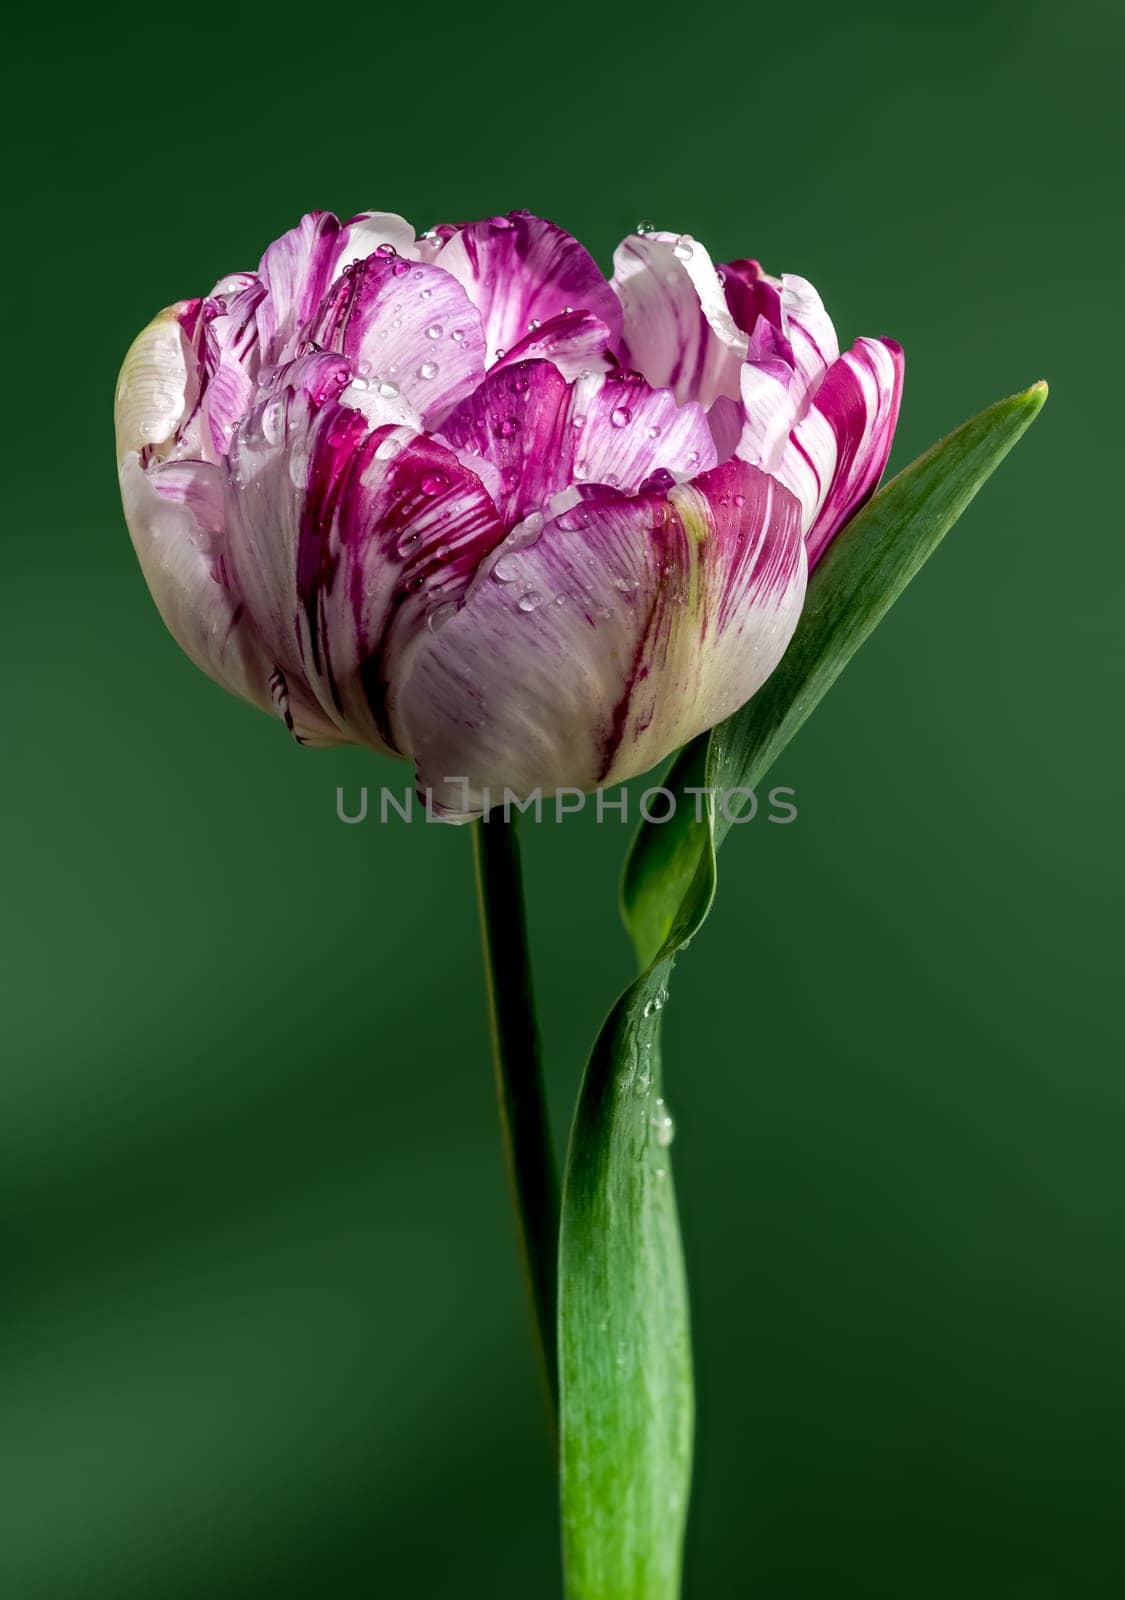 Blooming Tulip Jonquieres on a green background by Multipedia